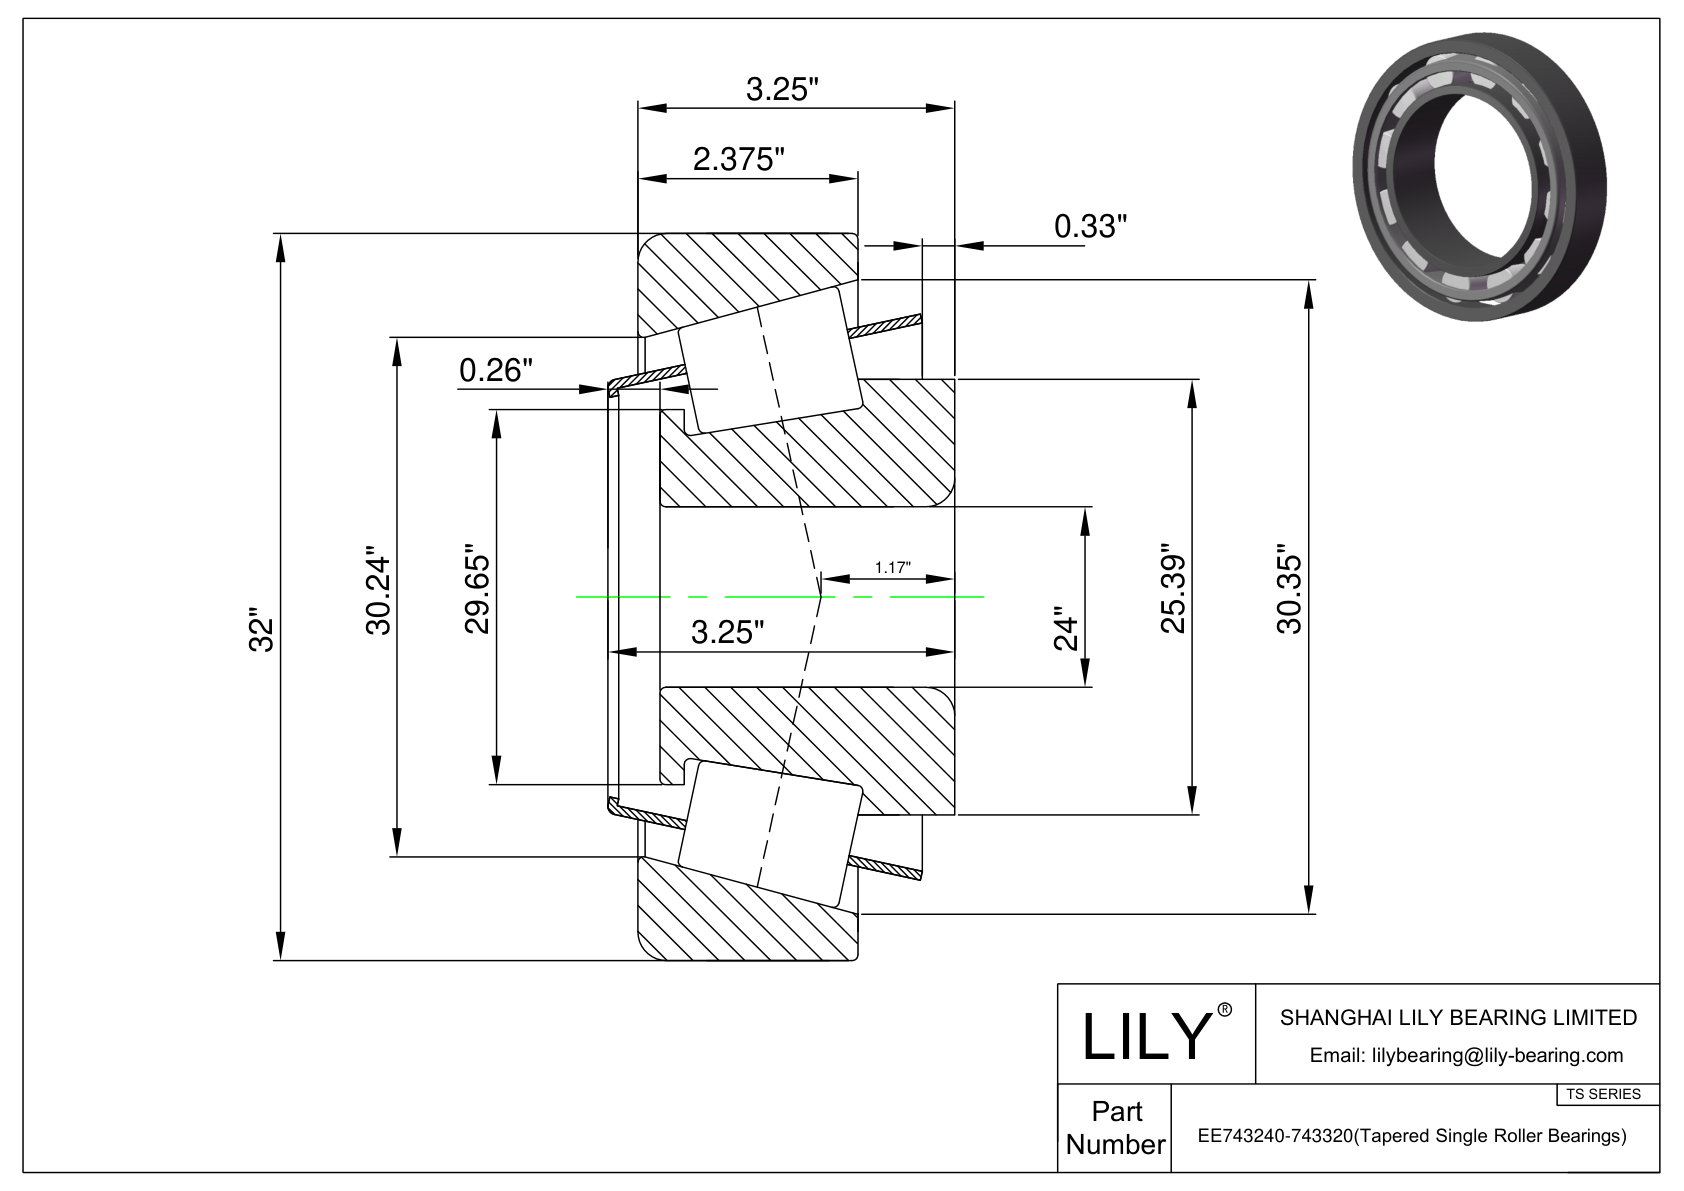 EE743240-743320 TS (Tapered Single Roller Bearings) (Imperial) cad drawing